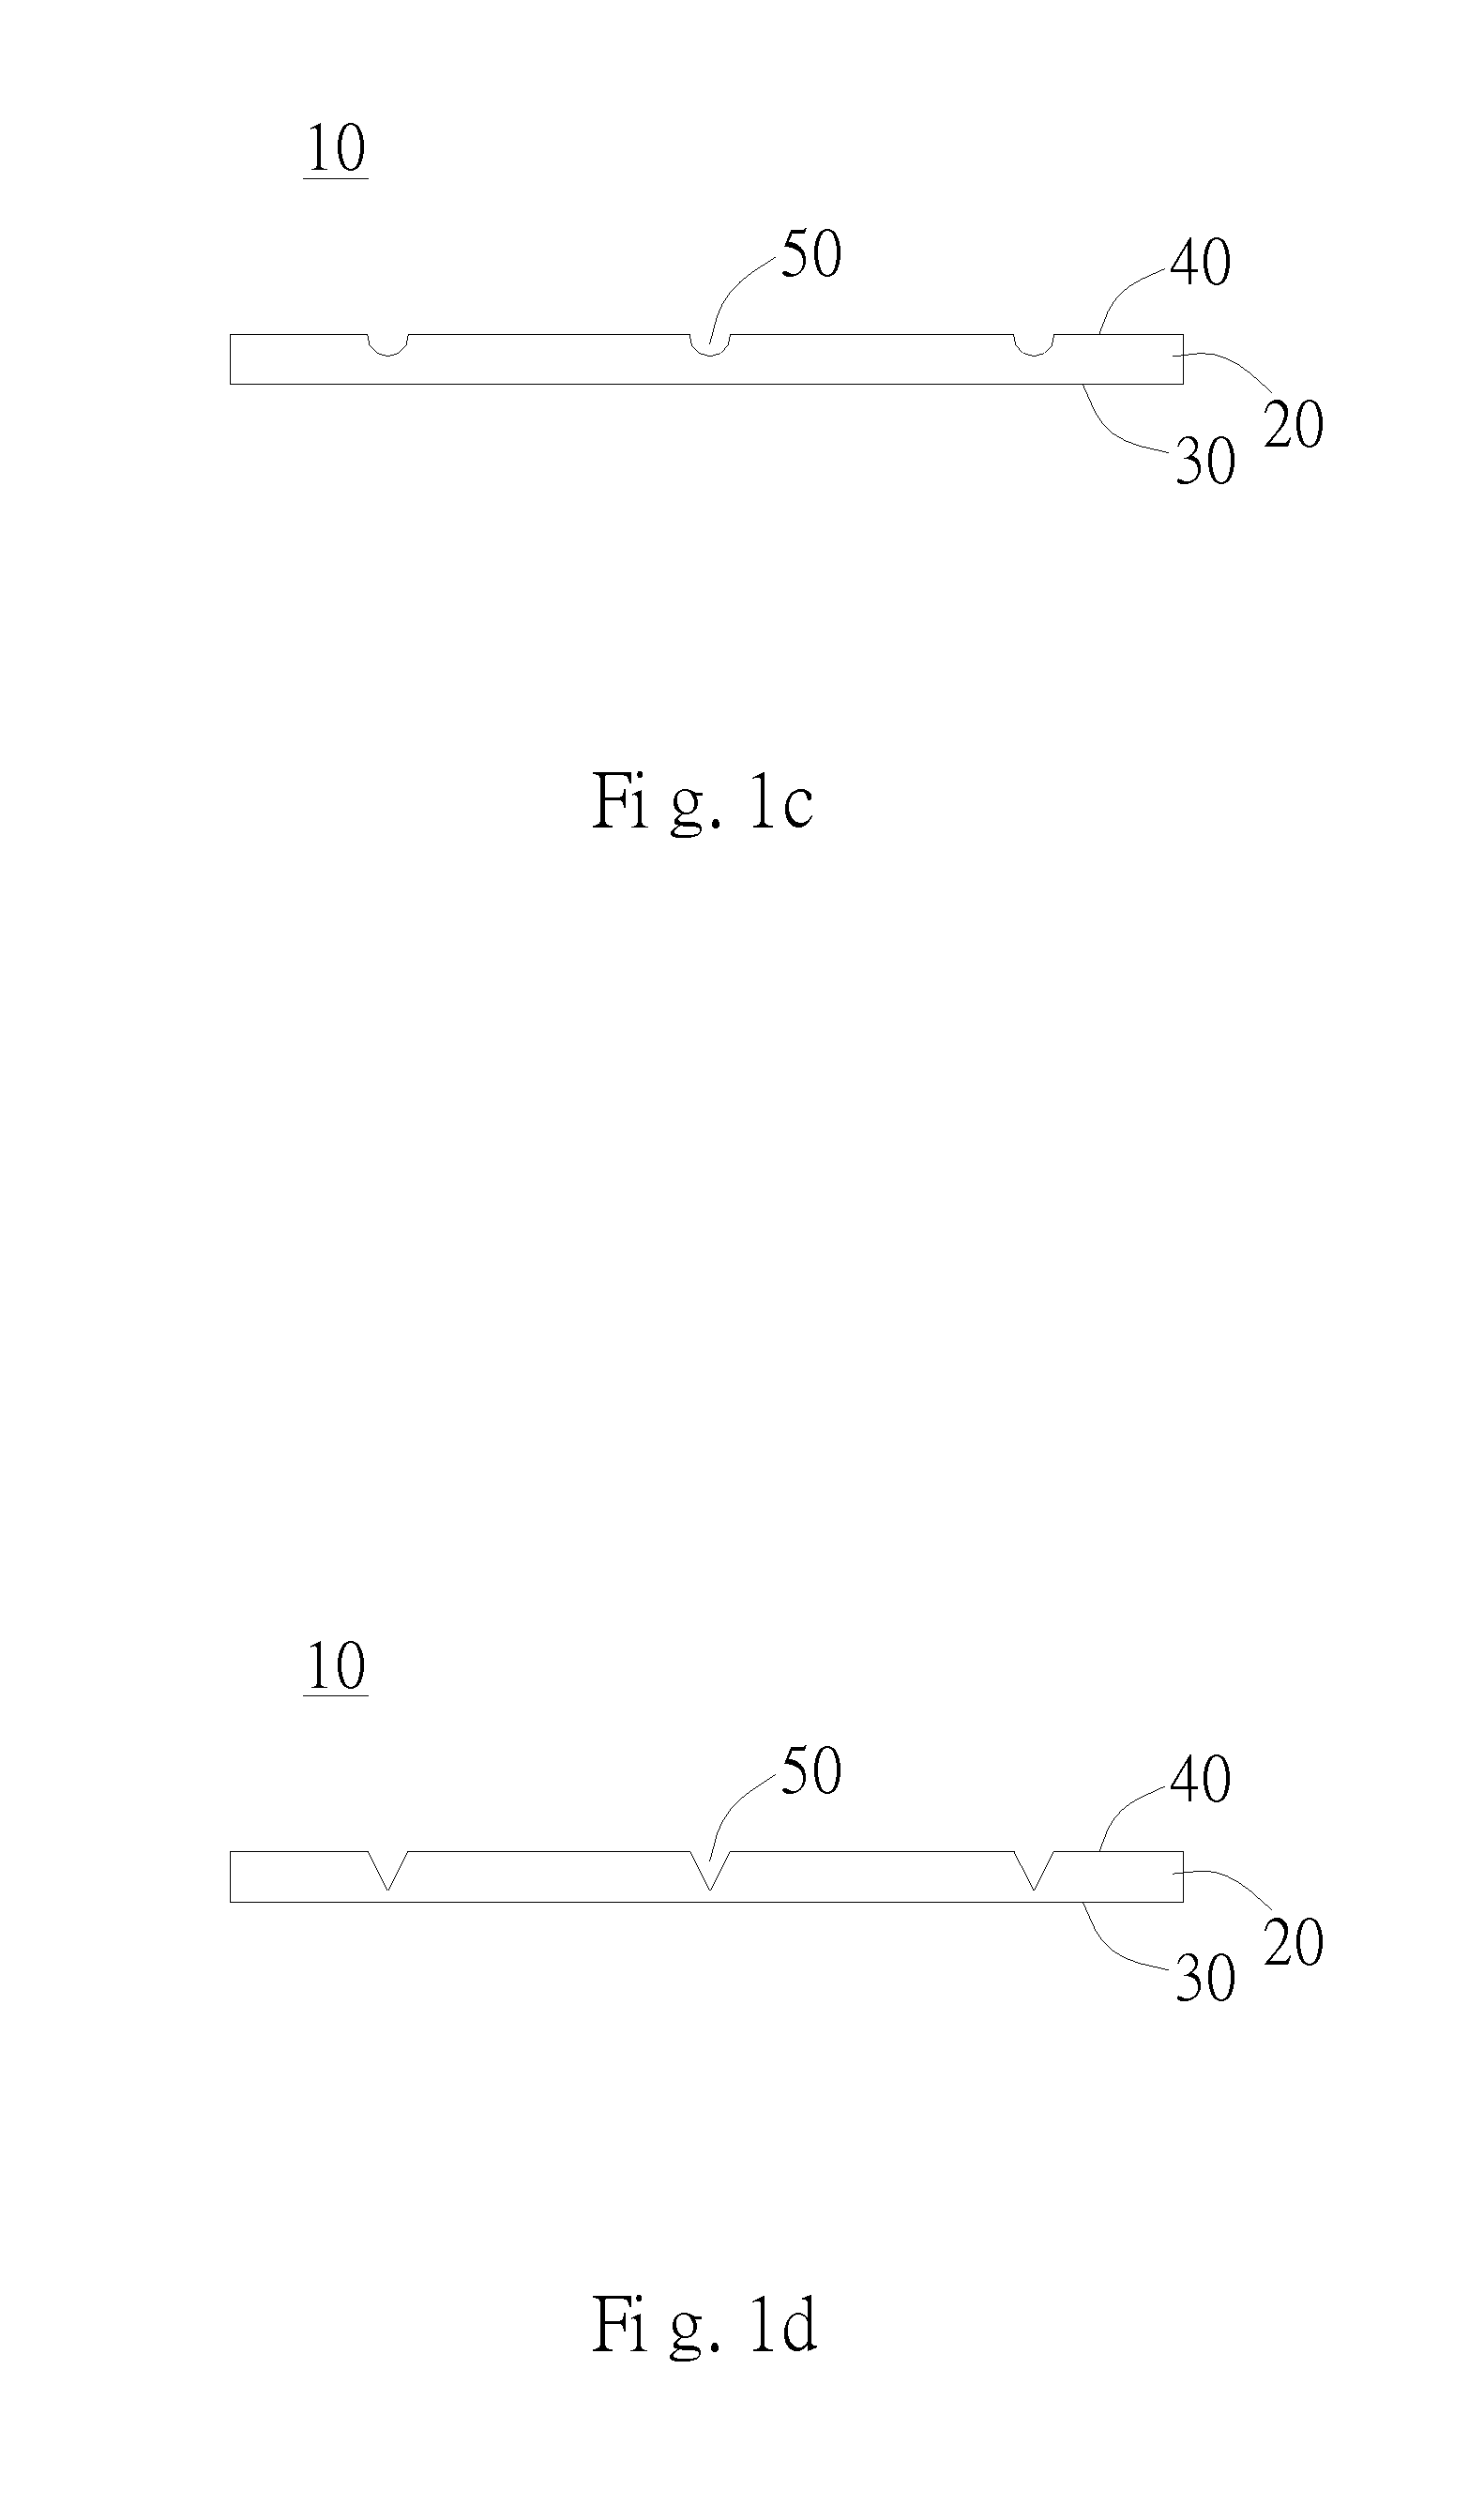 Diffuser having optical structures